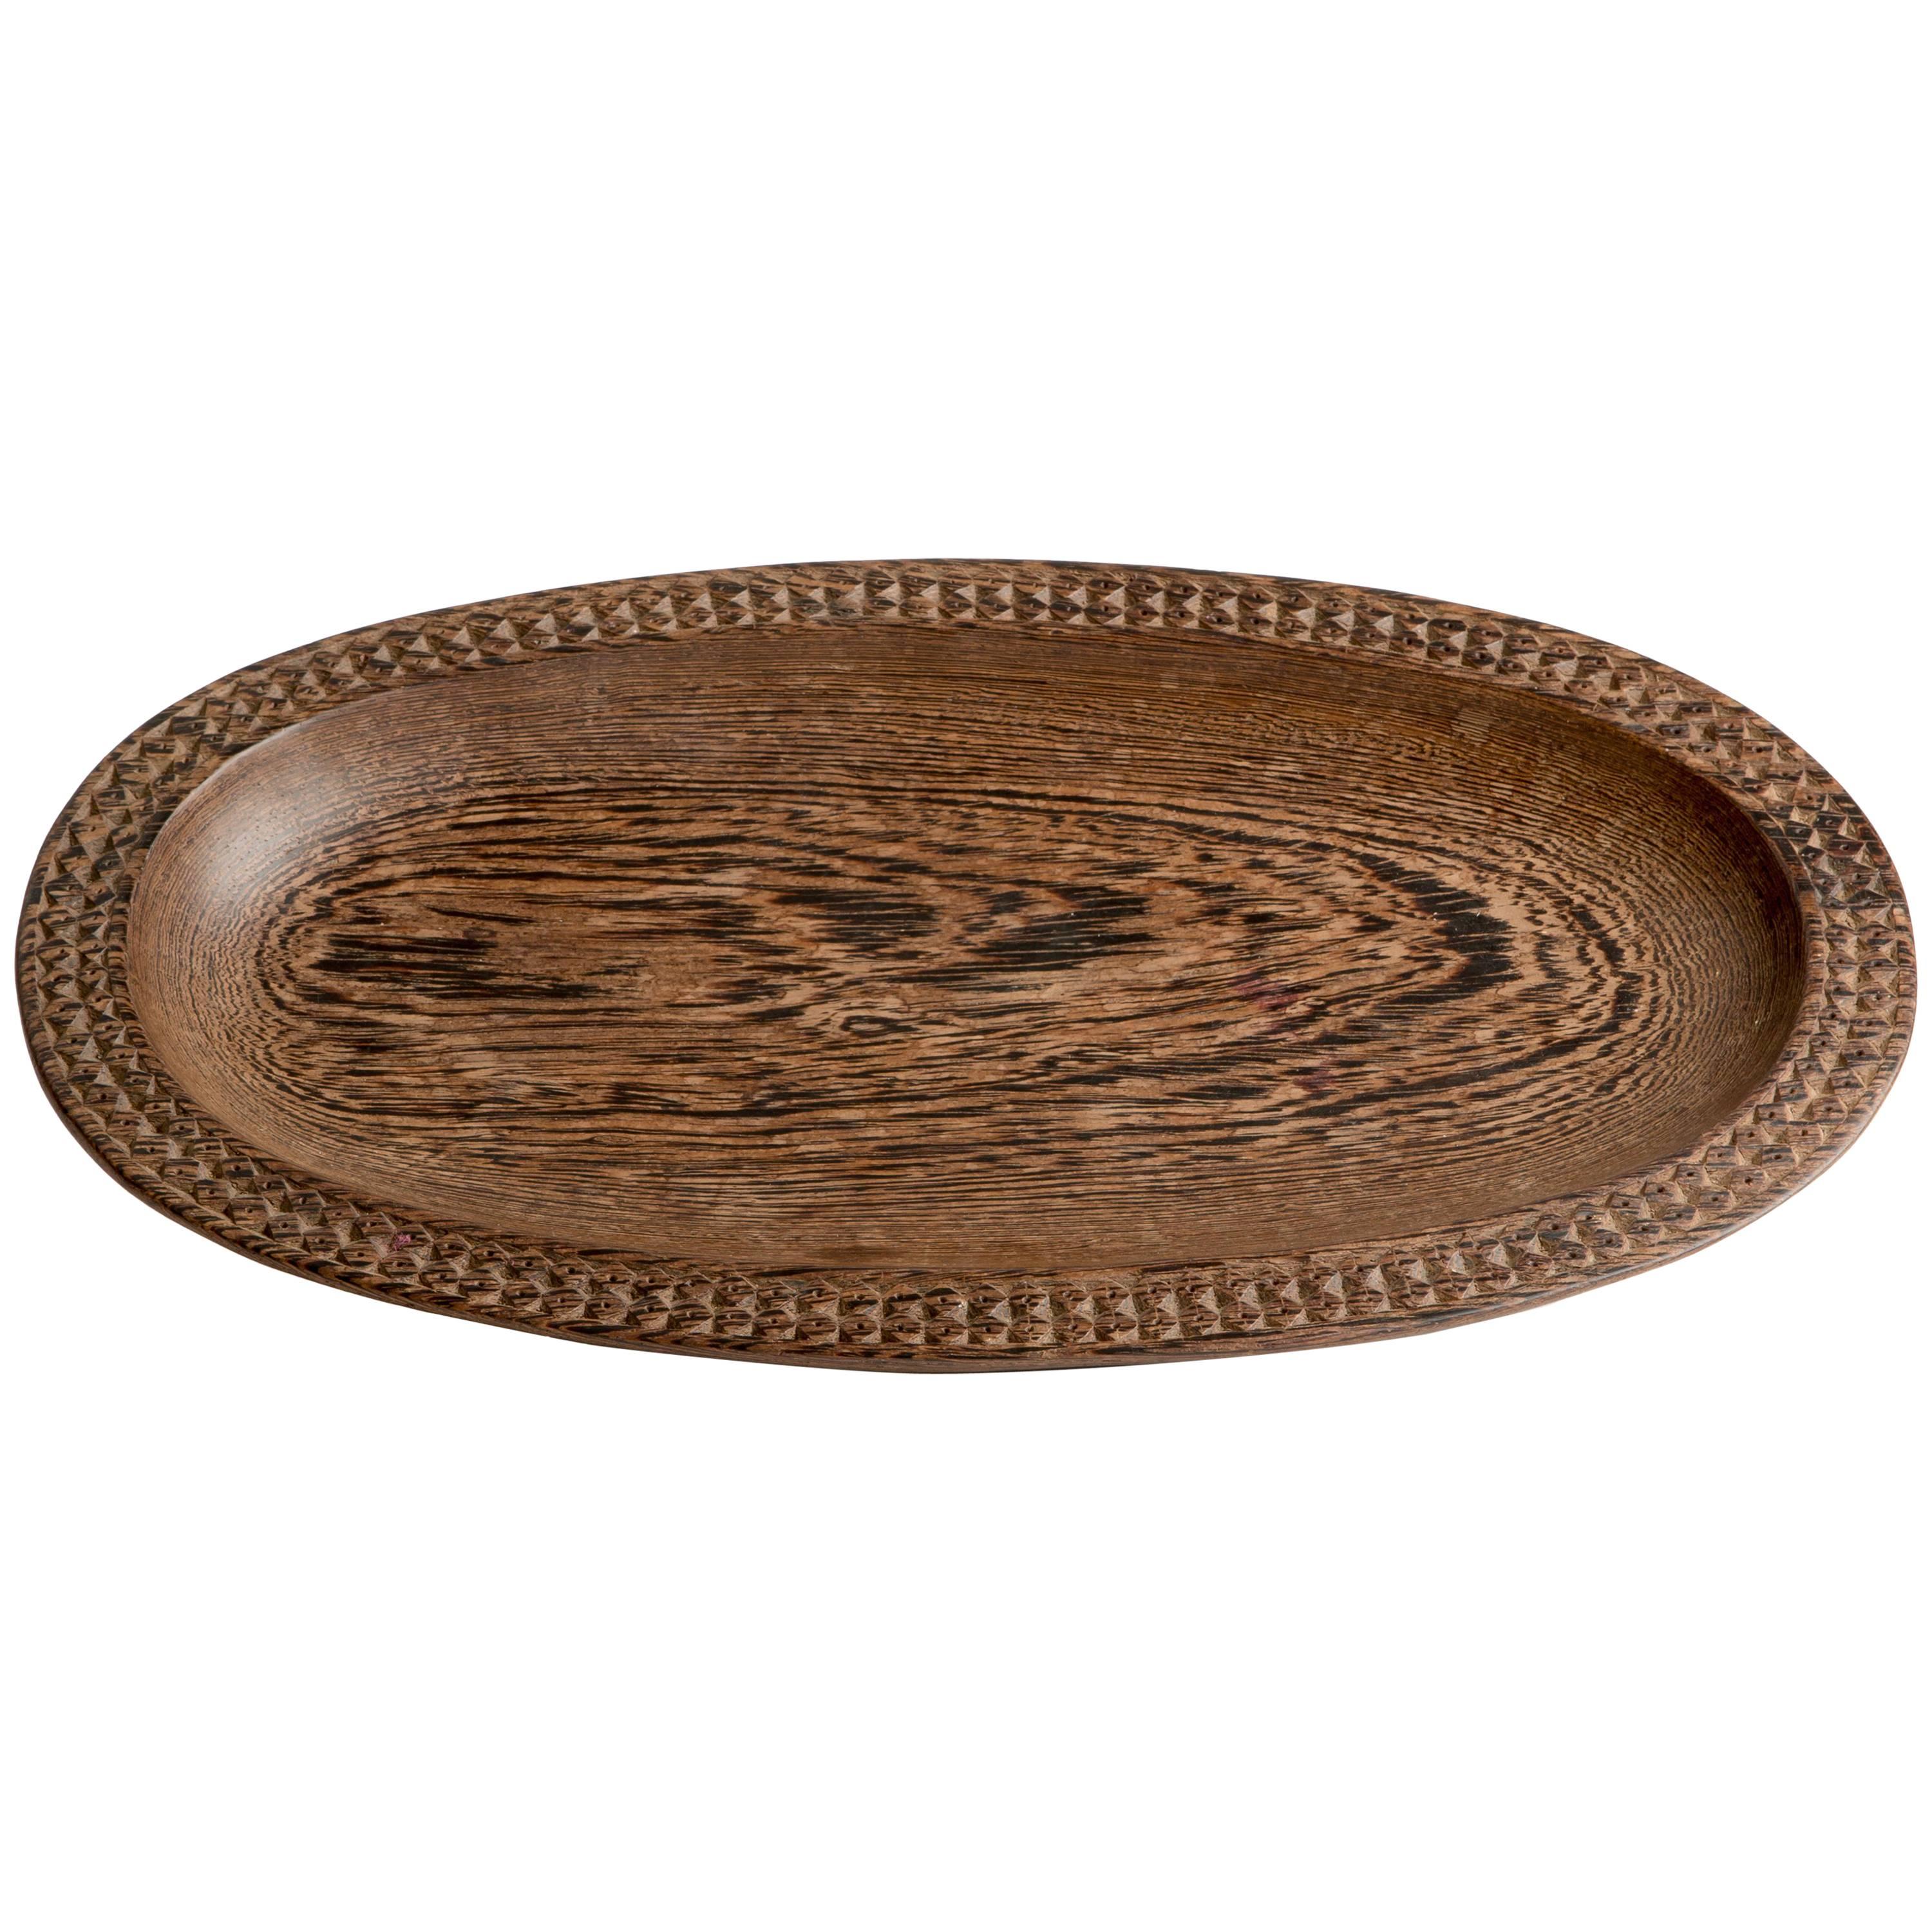 Carved Solid Wood Tray Made of Wenge